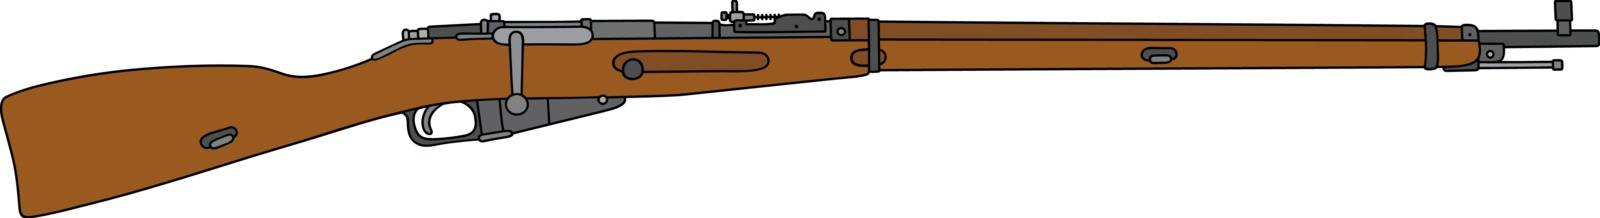 Hand drawing of an old long military rifle